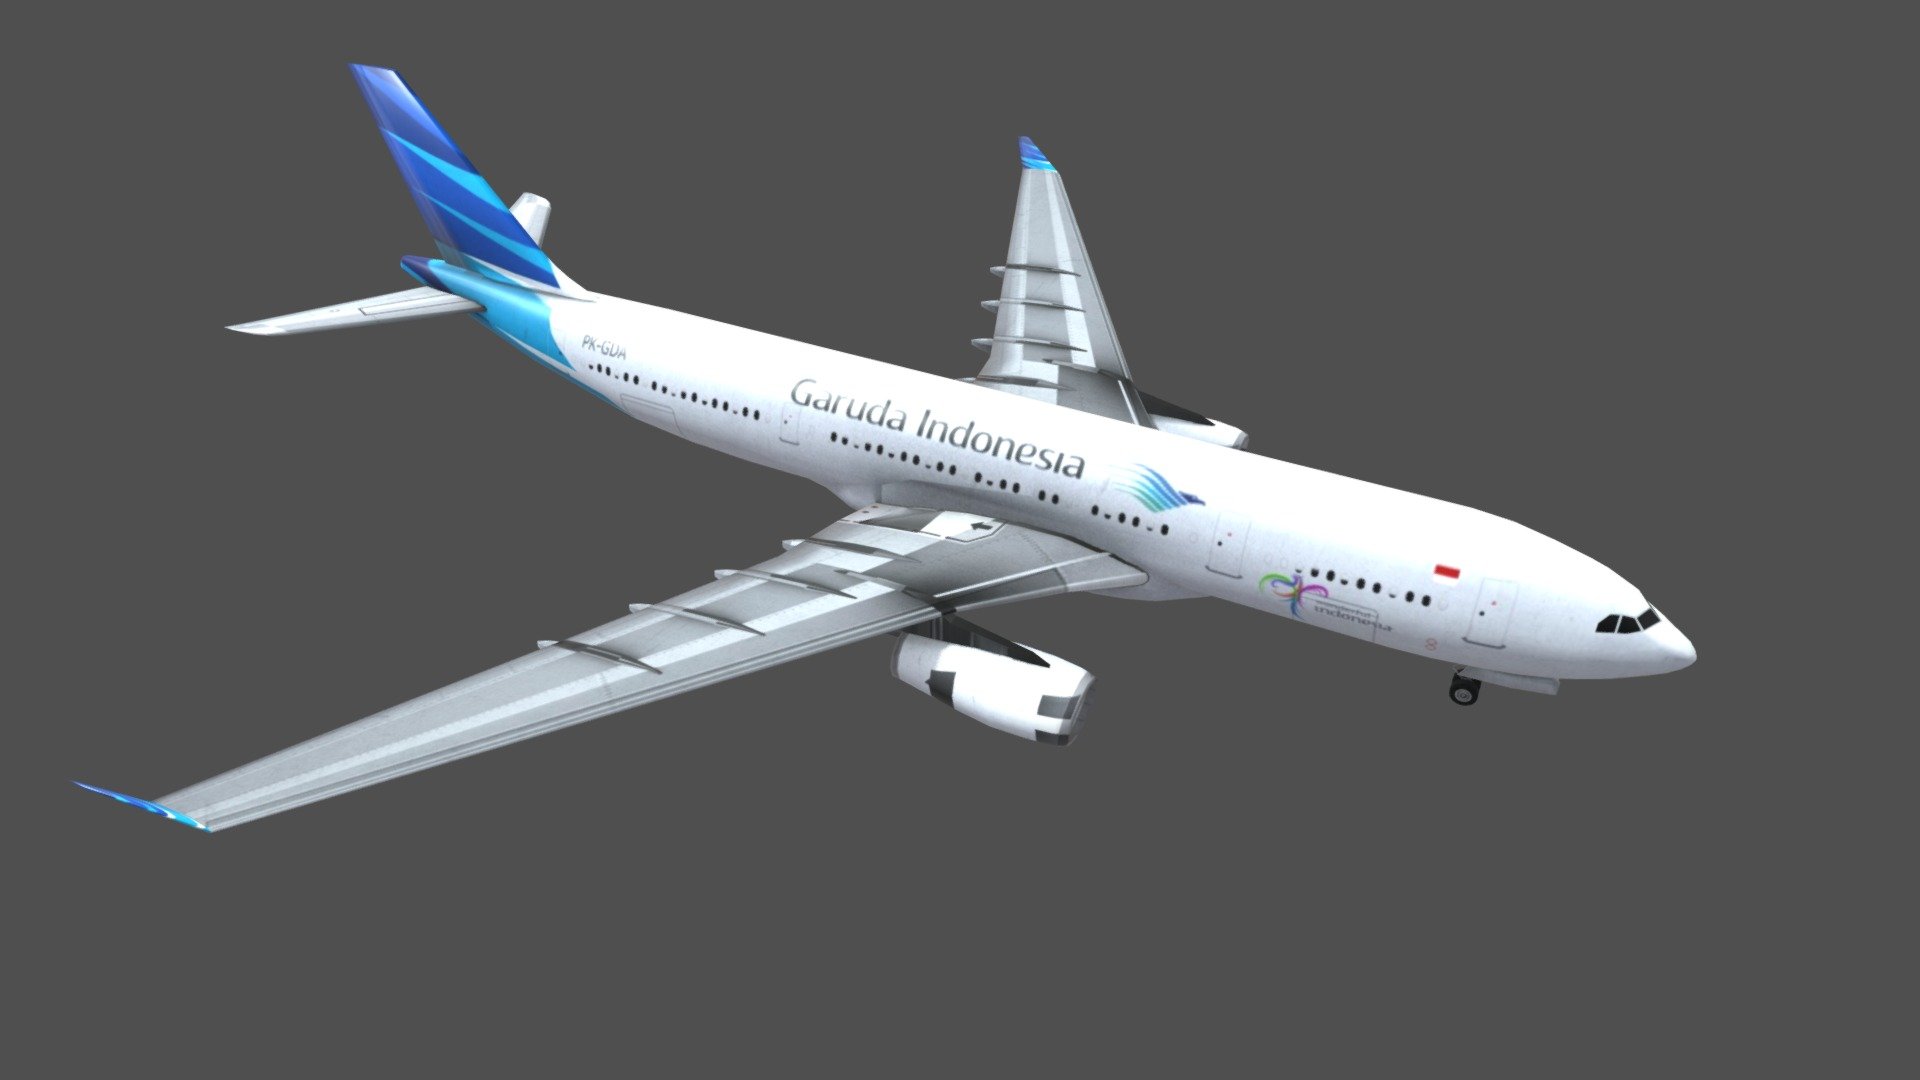 Air Bus 330 Garuda Airlines with Low poly for game and simulation

3Ds Max File with material and Texture

Published by Narulitas - Air Bus 330 Garuda Airlines - 3D model by narulitas 3d model